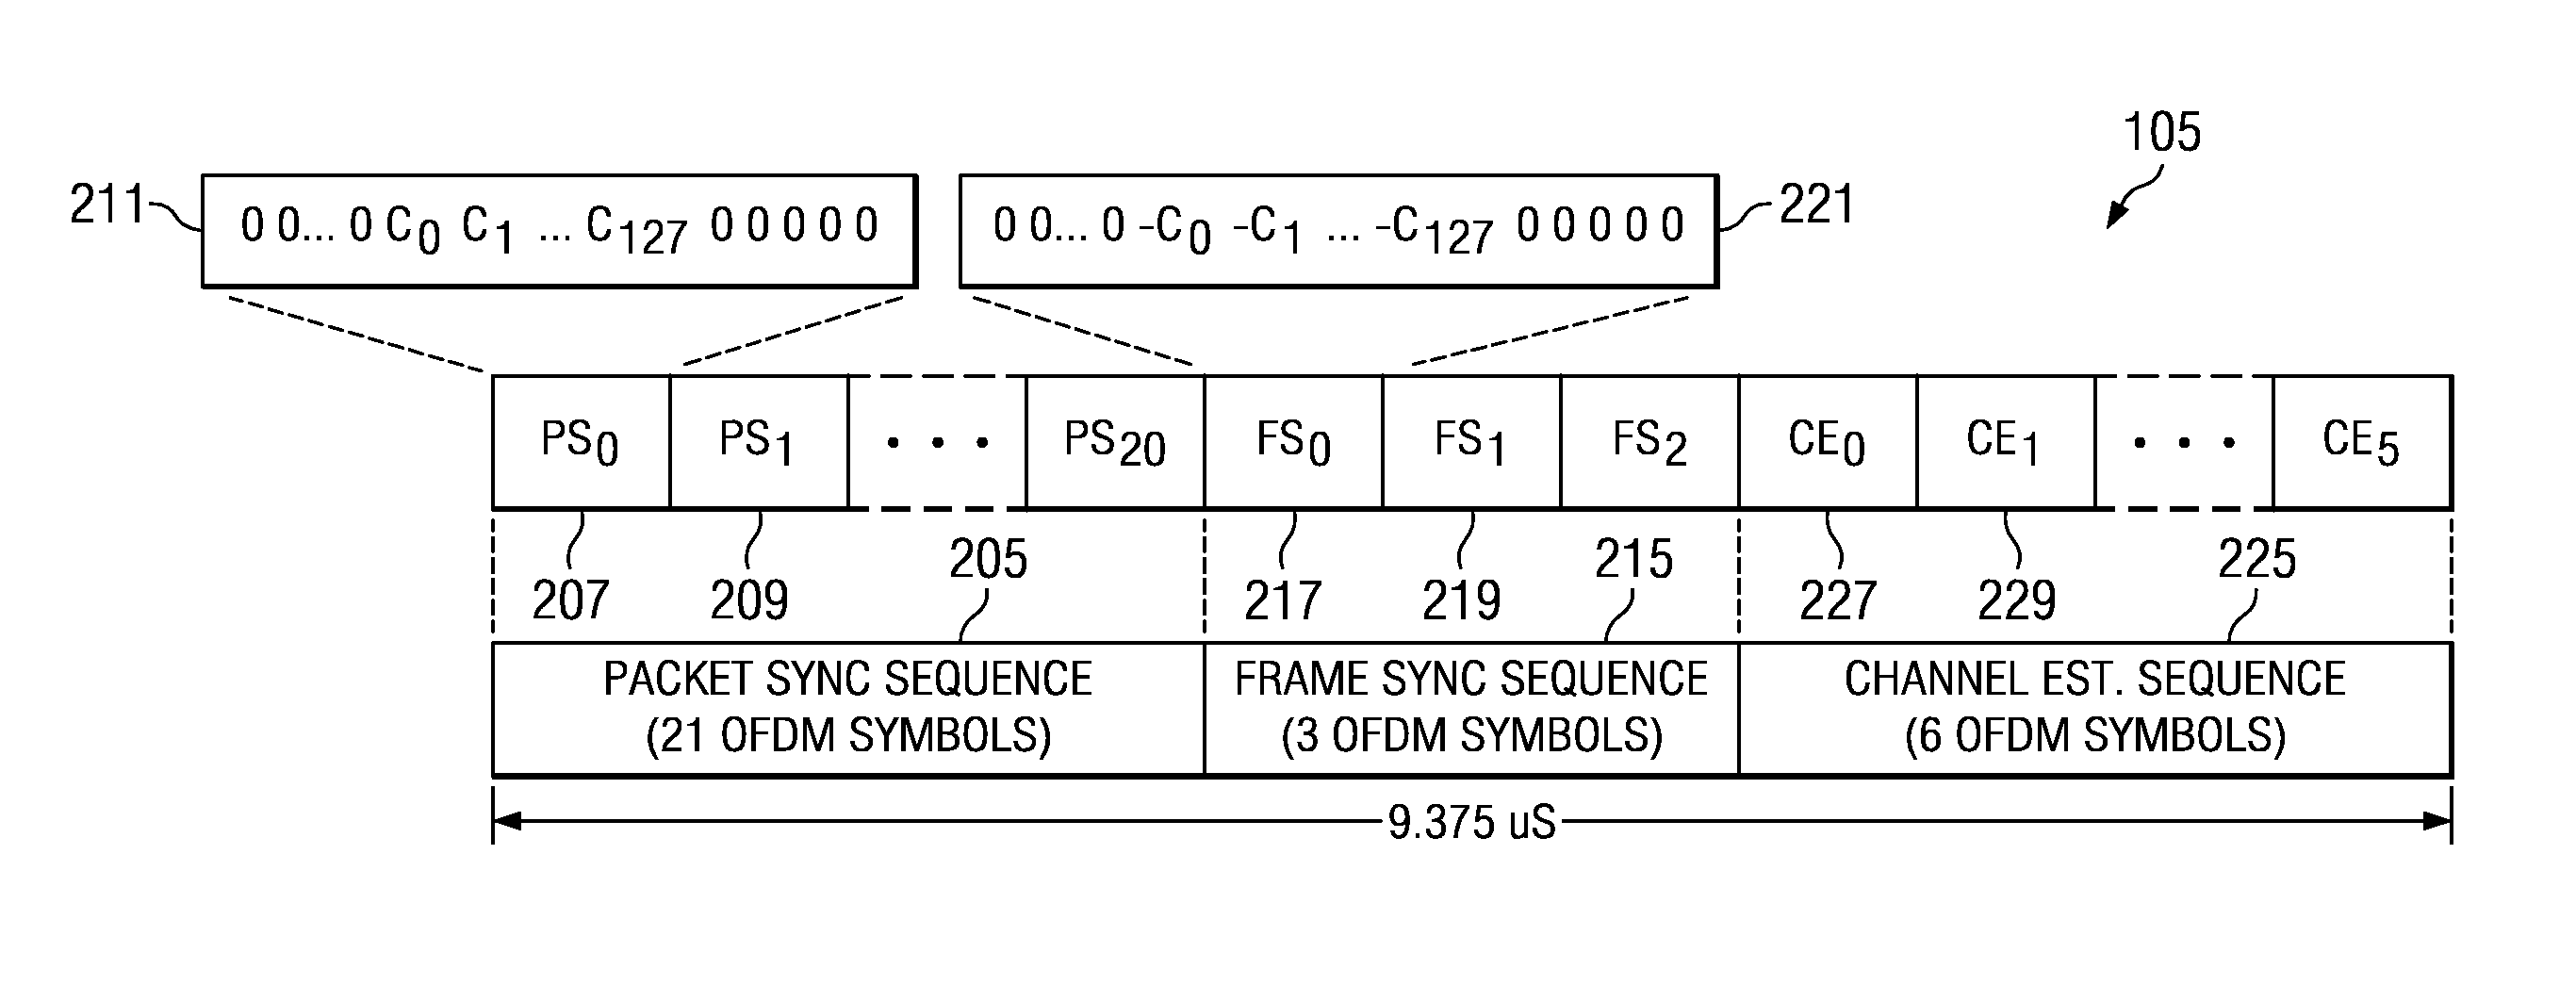 Preamble for a TFI-OFDM communications system